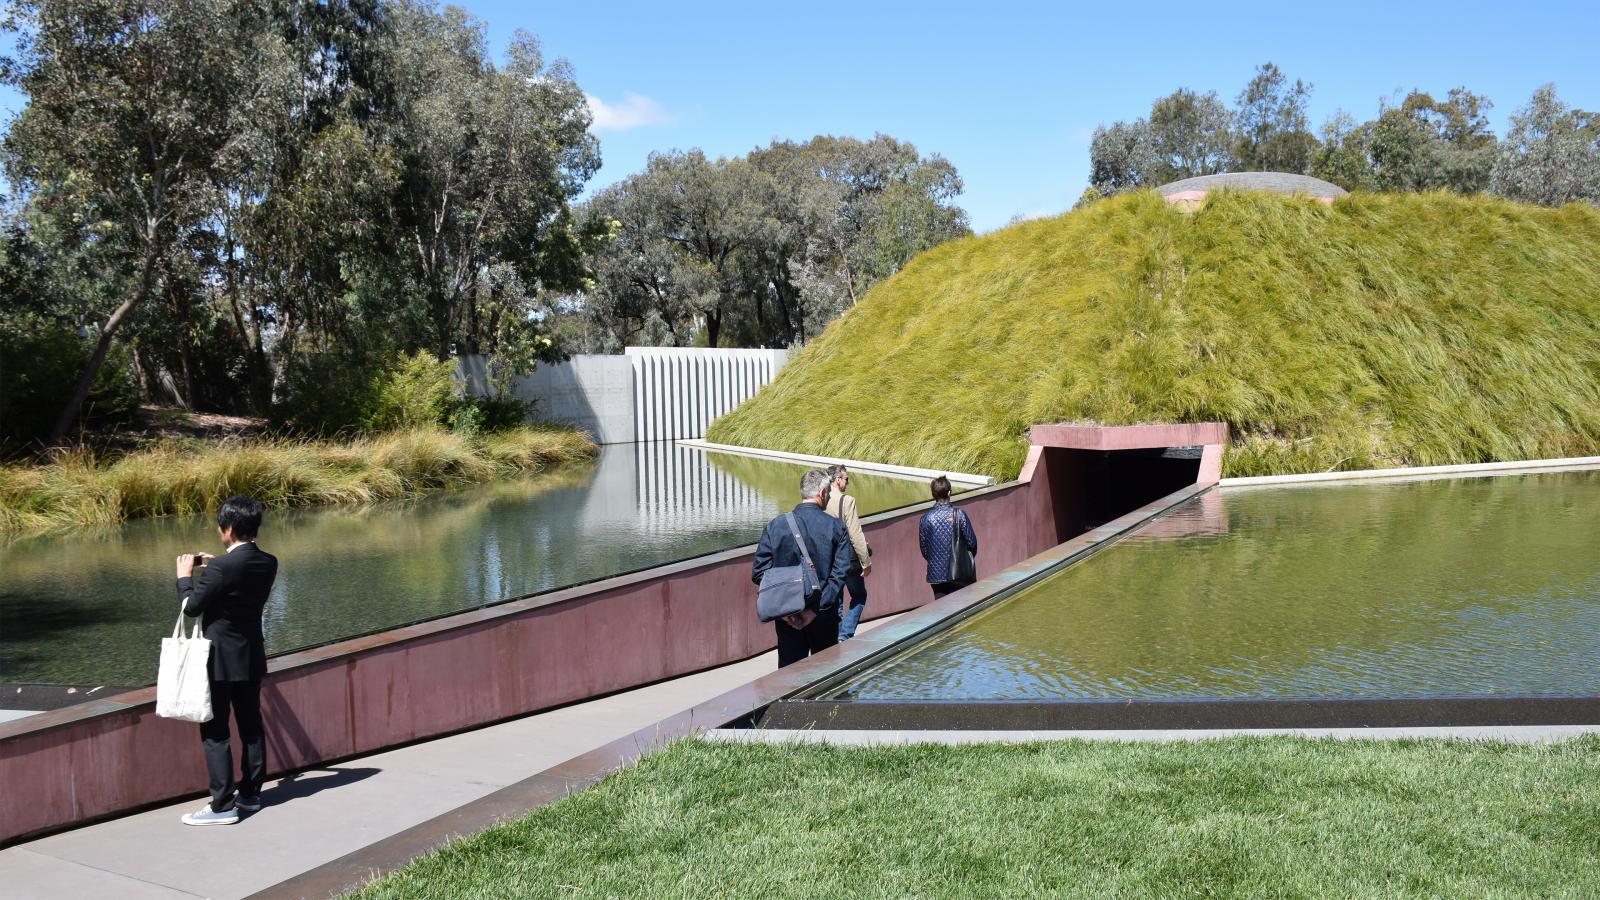 Three people walk towards a modern earth-sheltered building with a grass-covered roof in the Australian Garden, surrounded by water and greenery. One person is taking a photo while others approach the building's entrance. Trees and a blue sky can be seen in the background.